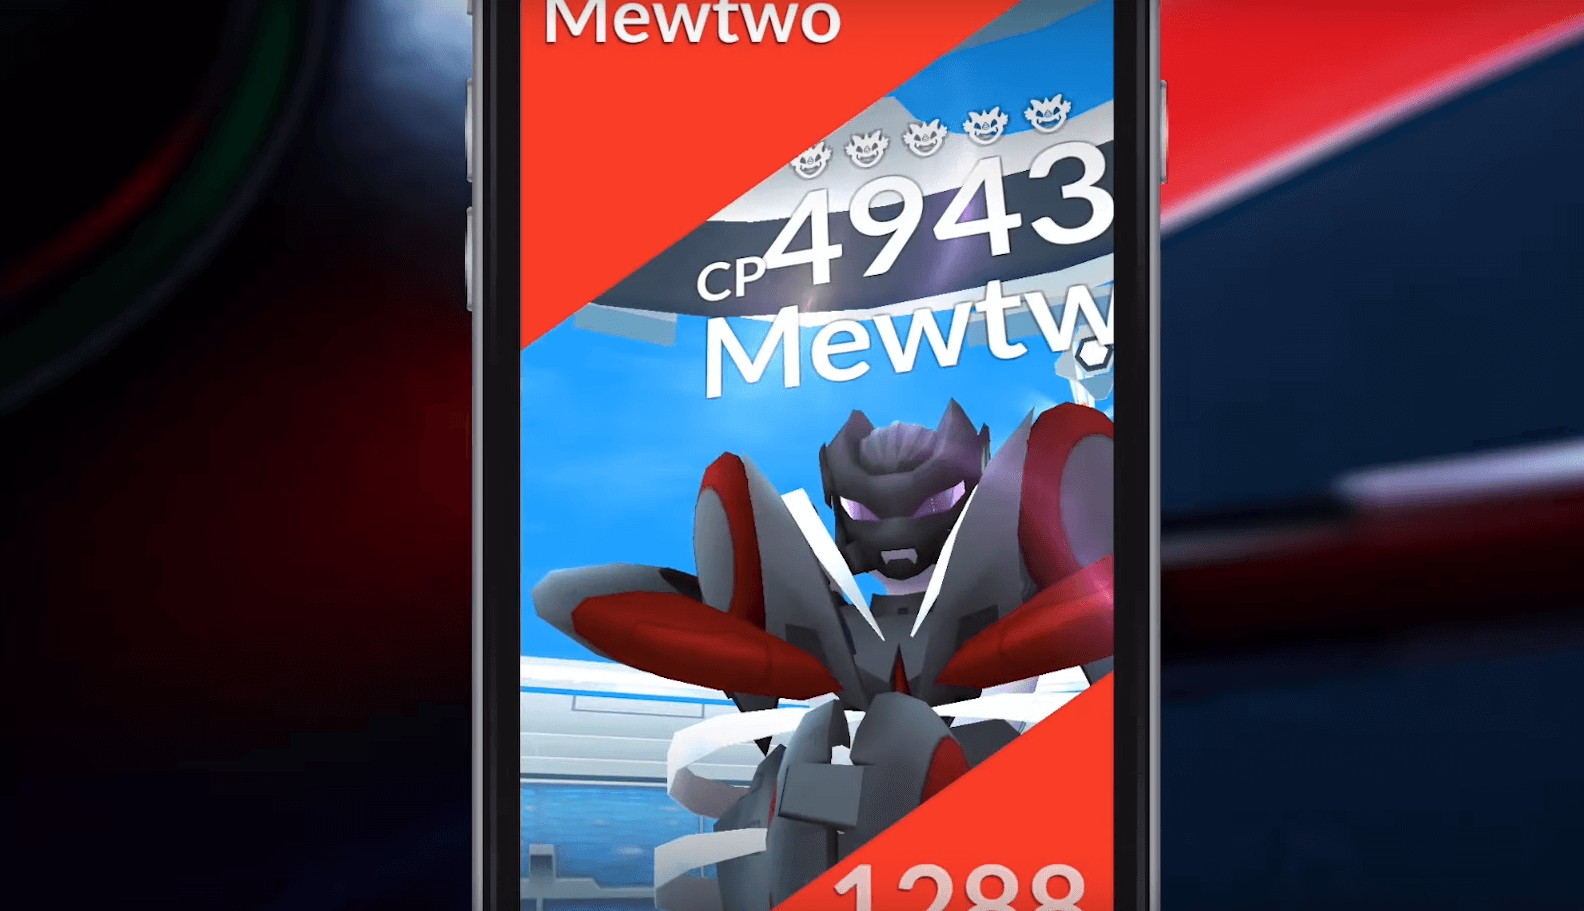 Stardust ✨ Pokémon GO ✪ on X: Ready for Armored Mewtwo?⚔️🛡️ 3 days  left!🤘 📅 10th to 31st July Stock up your Premium Raid Passes in advance  Get extra free Pokécoins (Msg